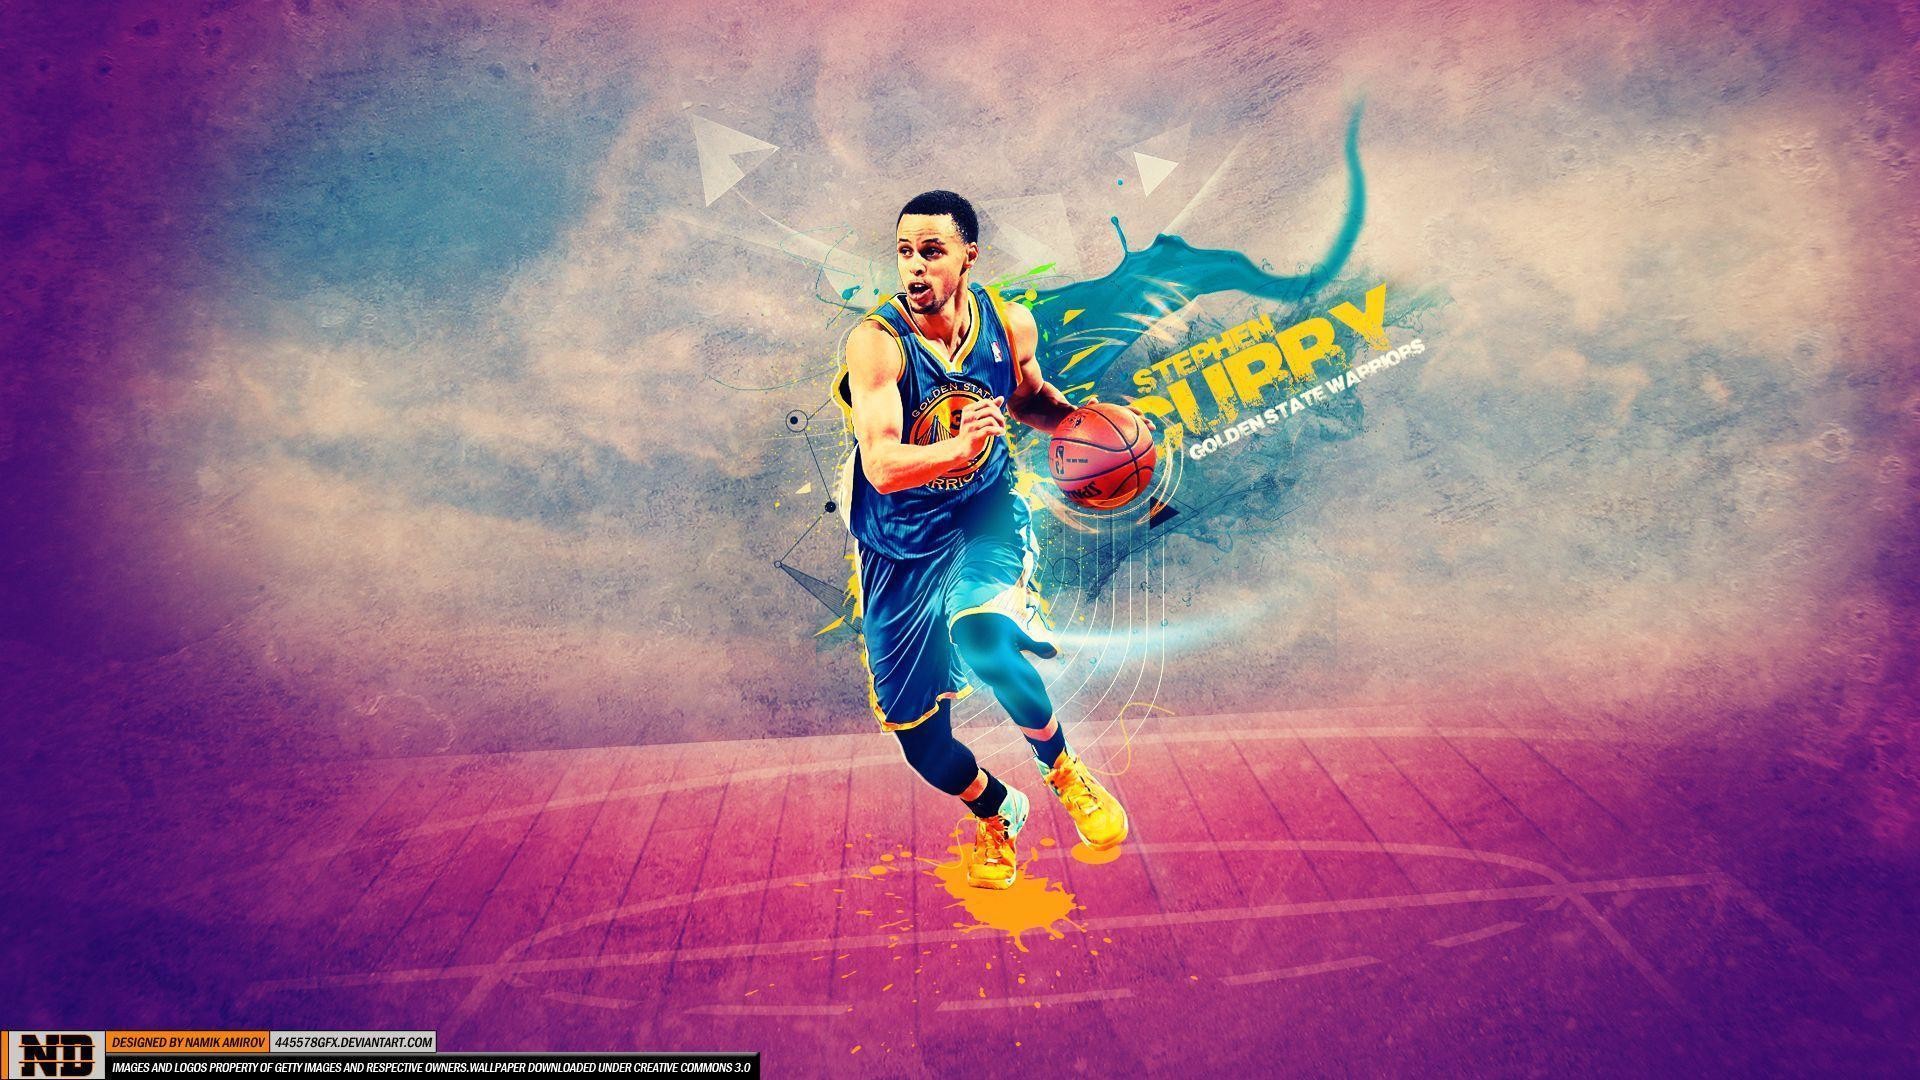 Stephen curry wallpaper, Stephen Curry and Kyrie irving on Pinterest